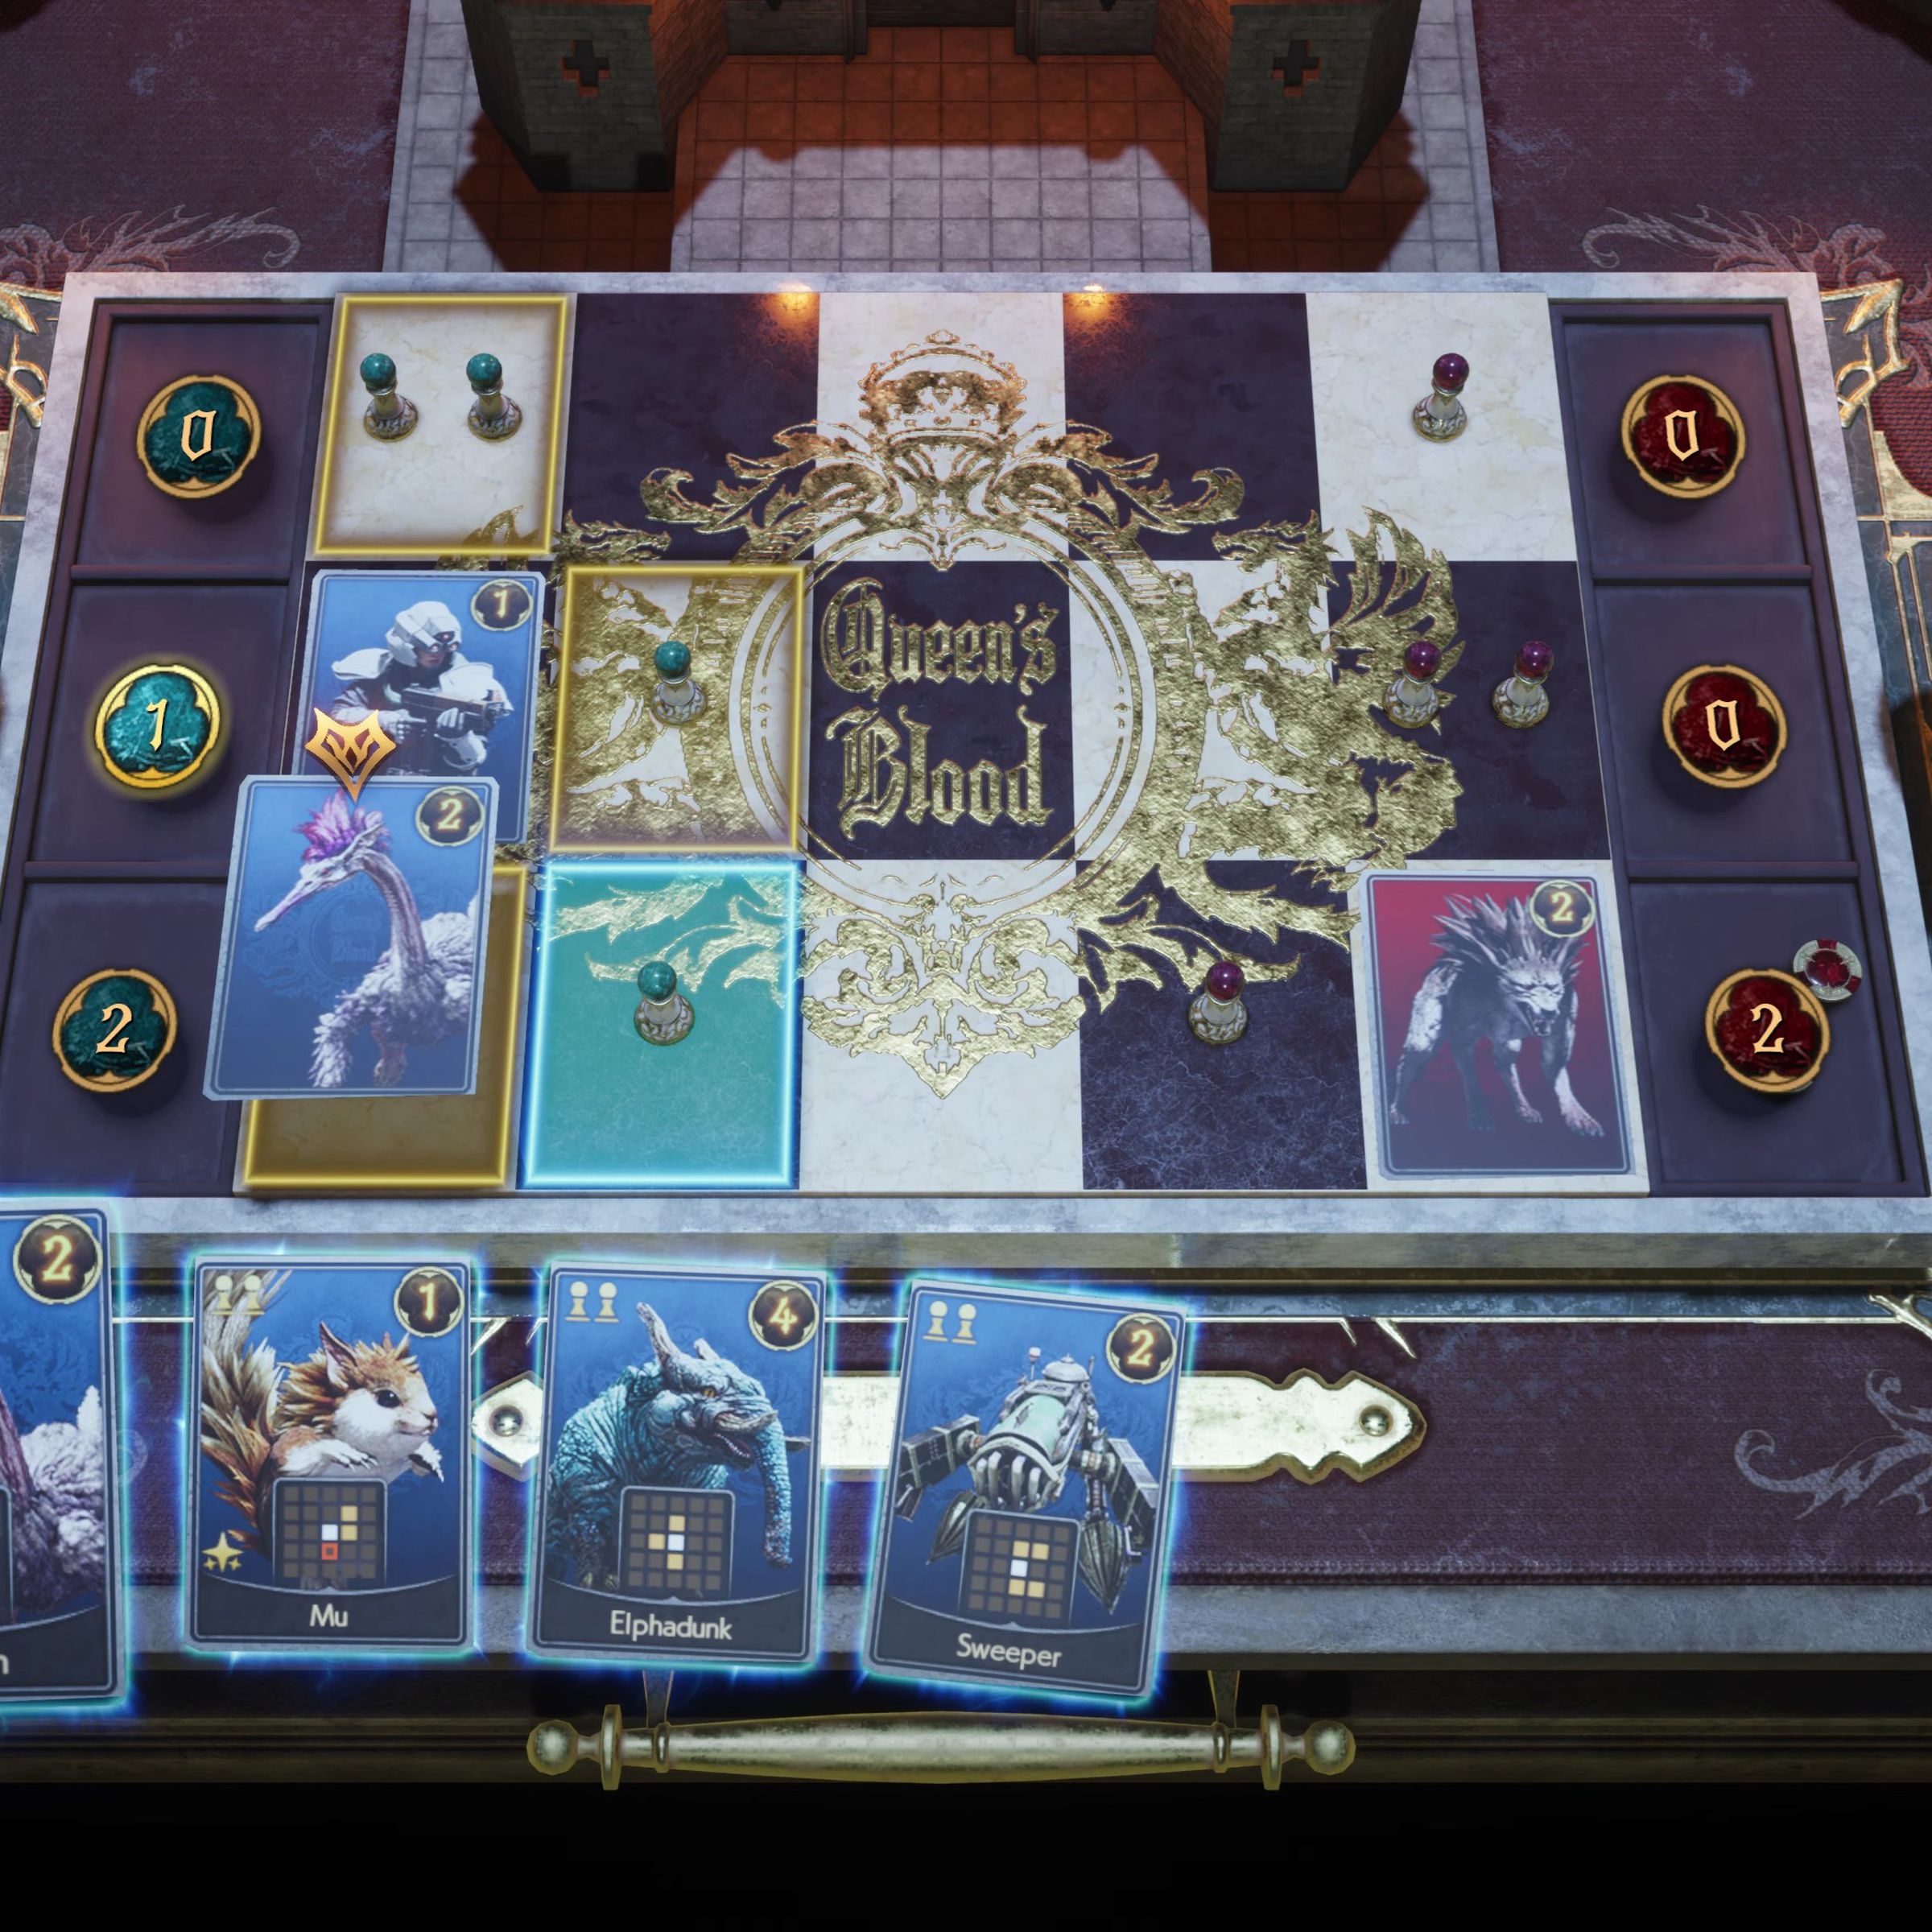 Screenshot from Final Fantasy VII Rebirth featuring the Queen’s Blood card minigame.